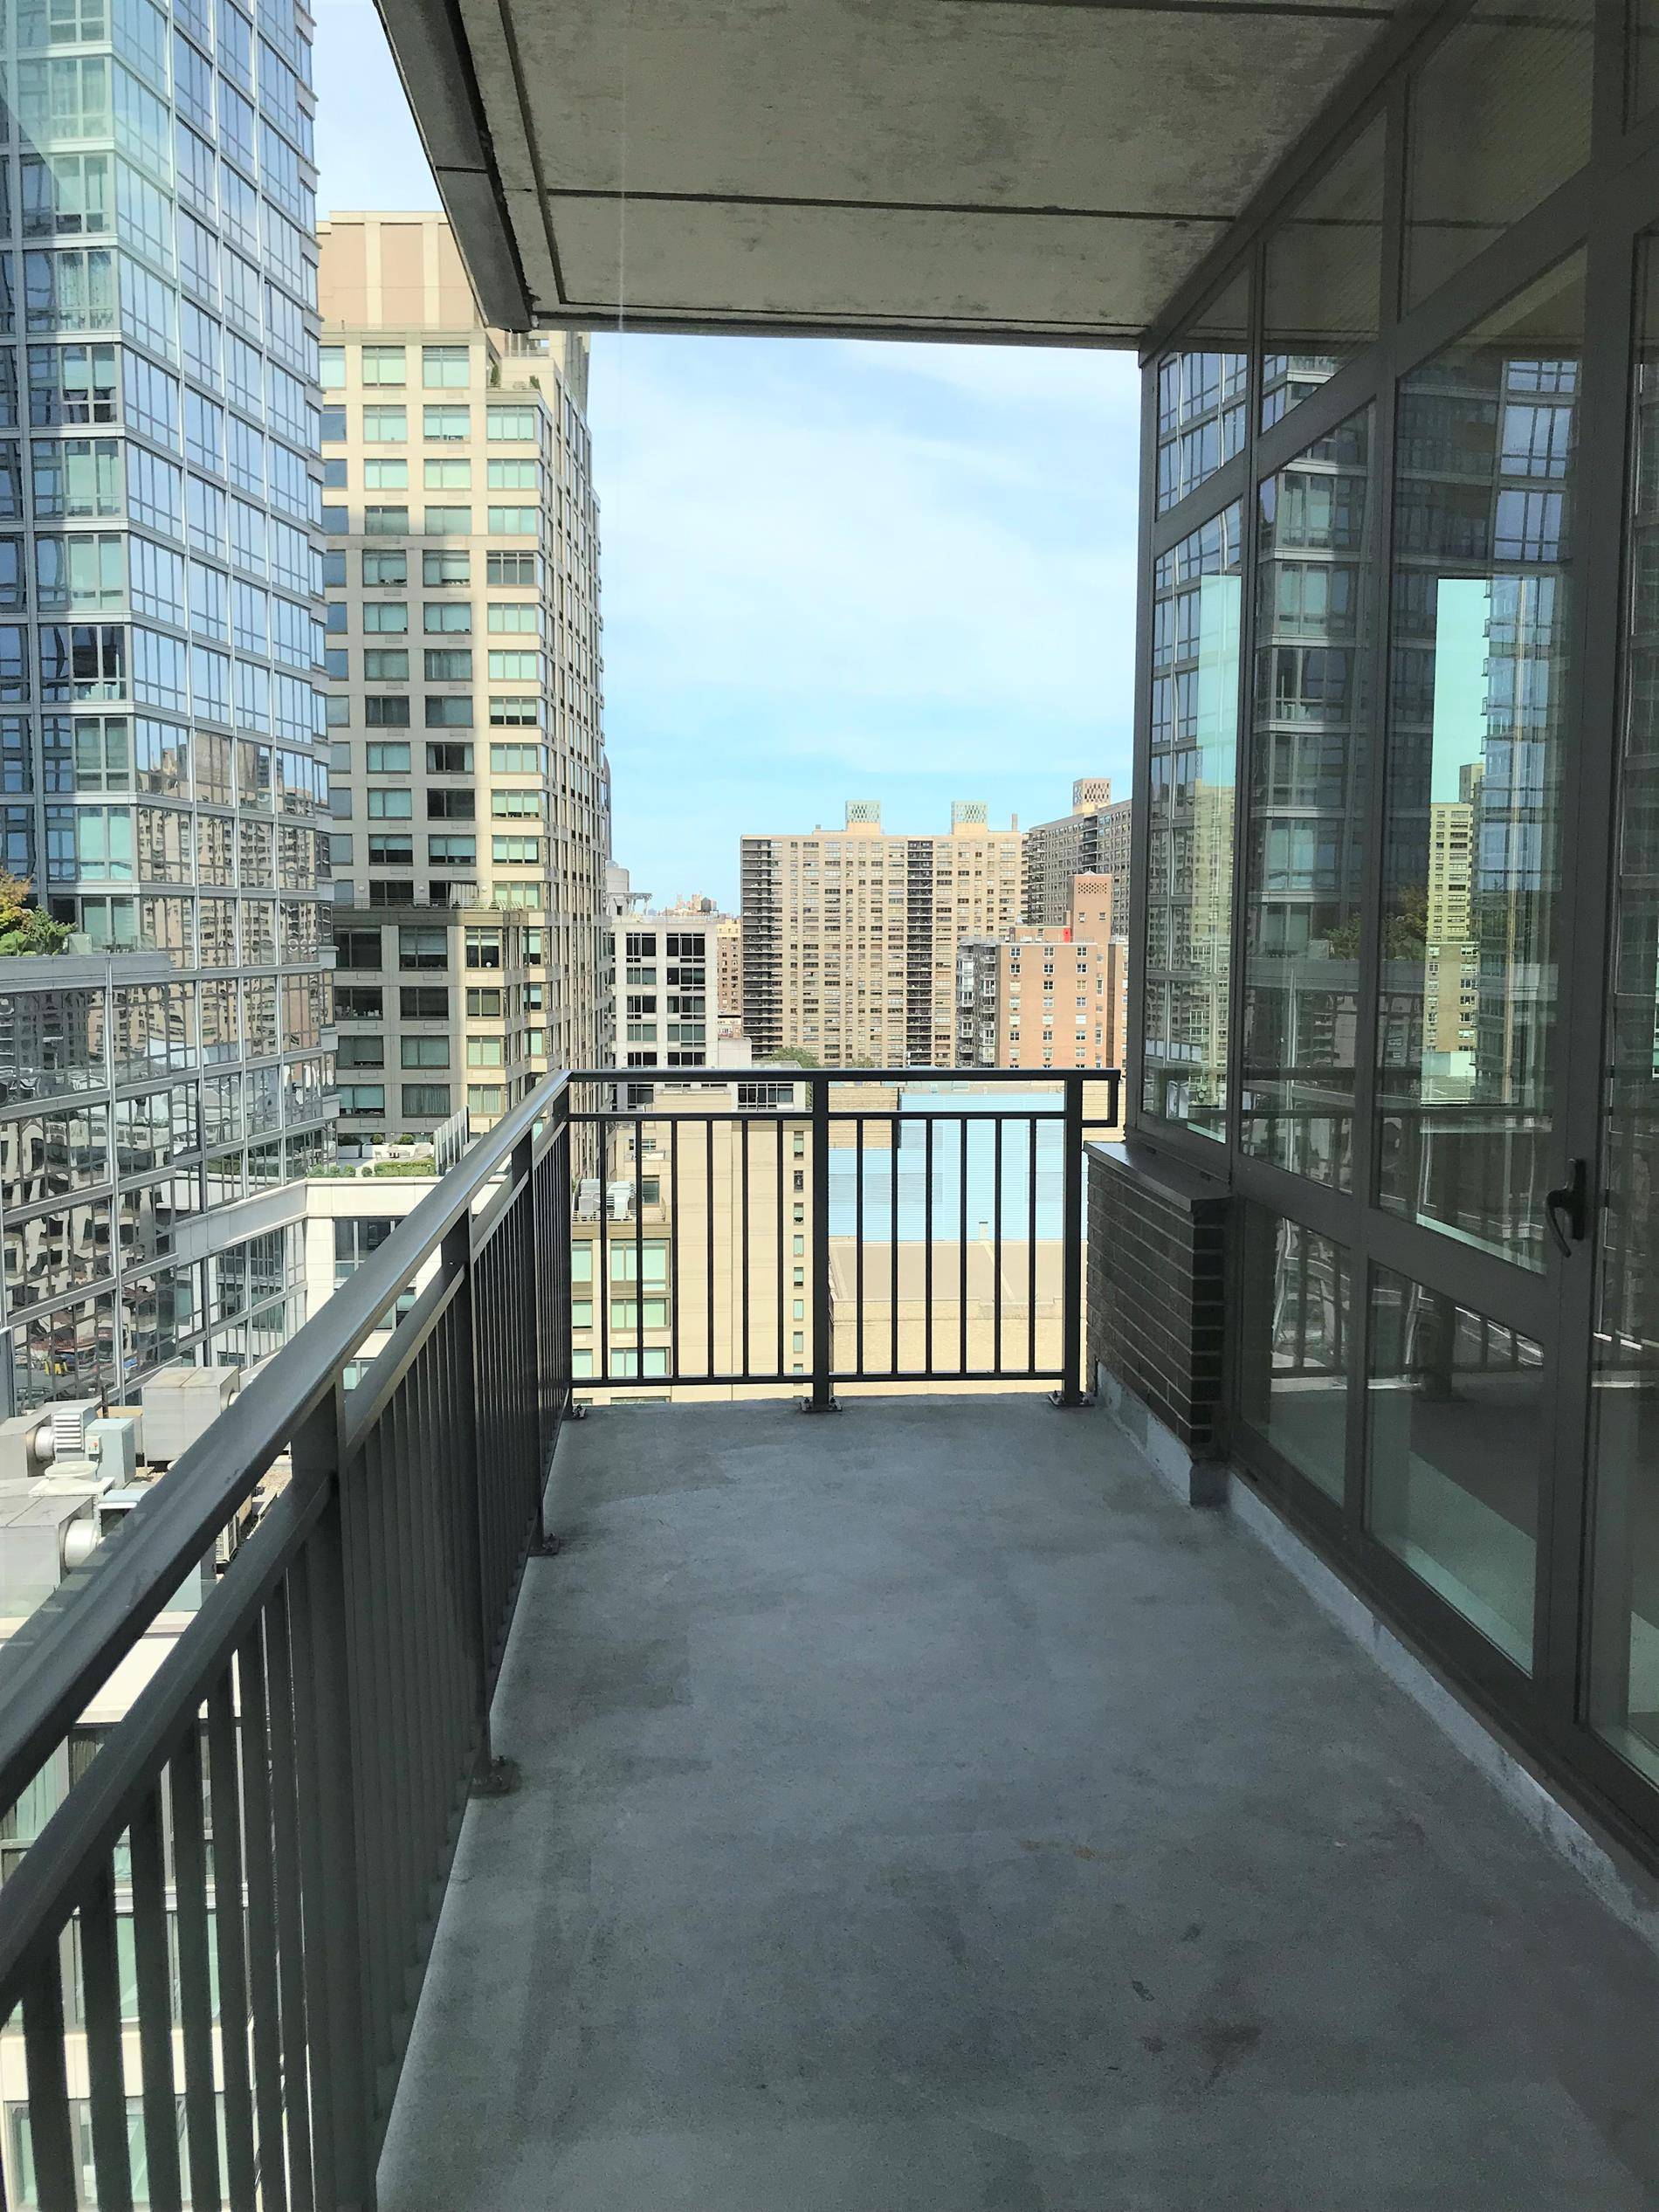 Cozy 3 Bedroom Apartment With Endless Amenities In High-rise Building Near Lincoln Center